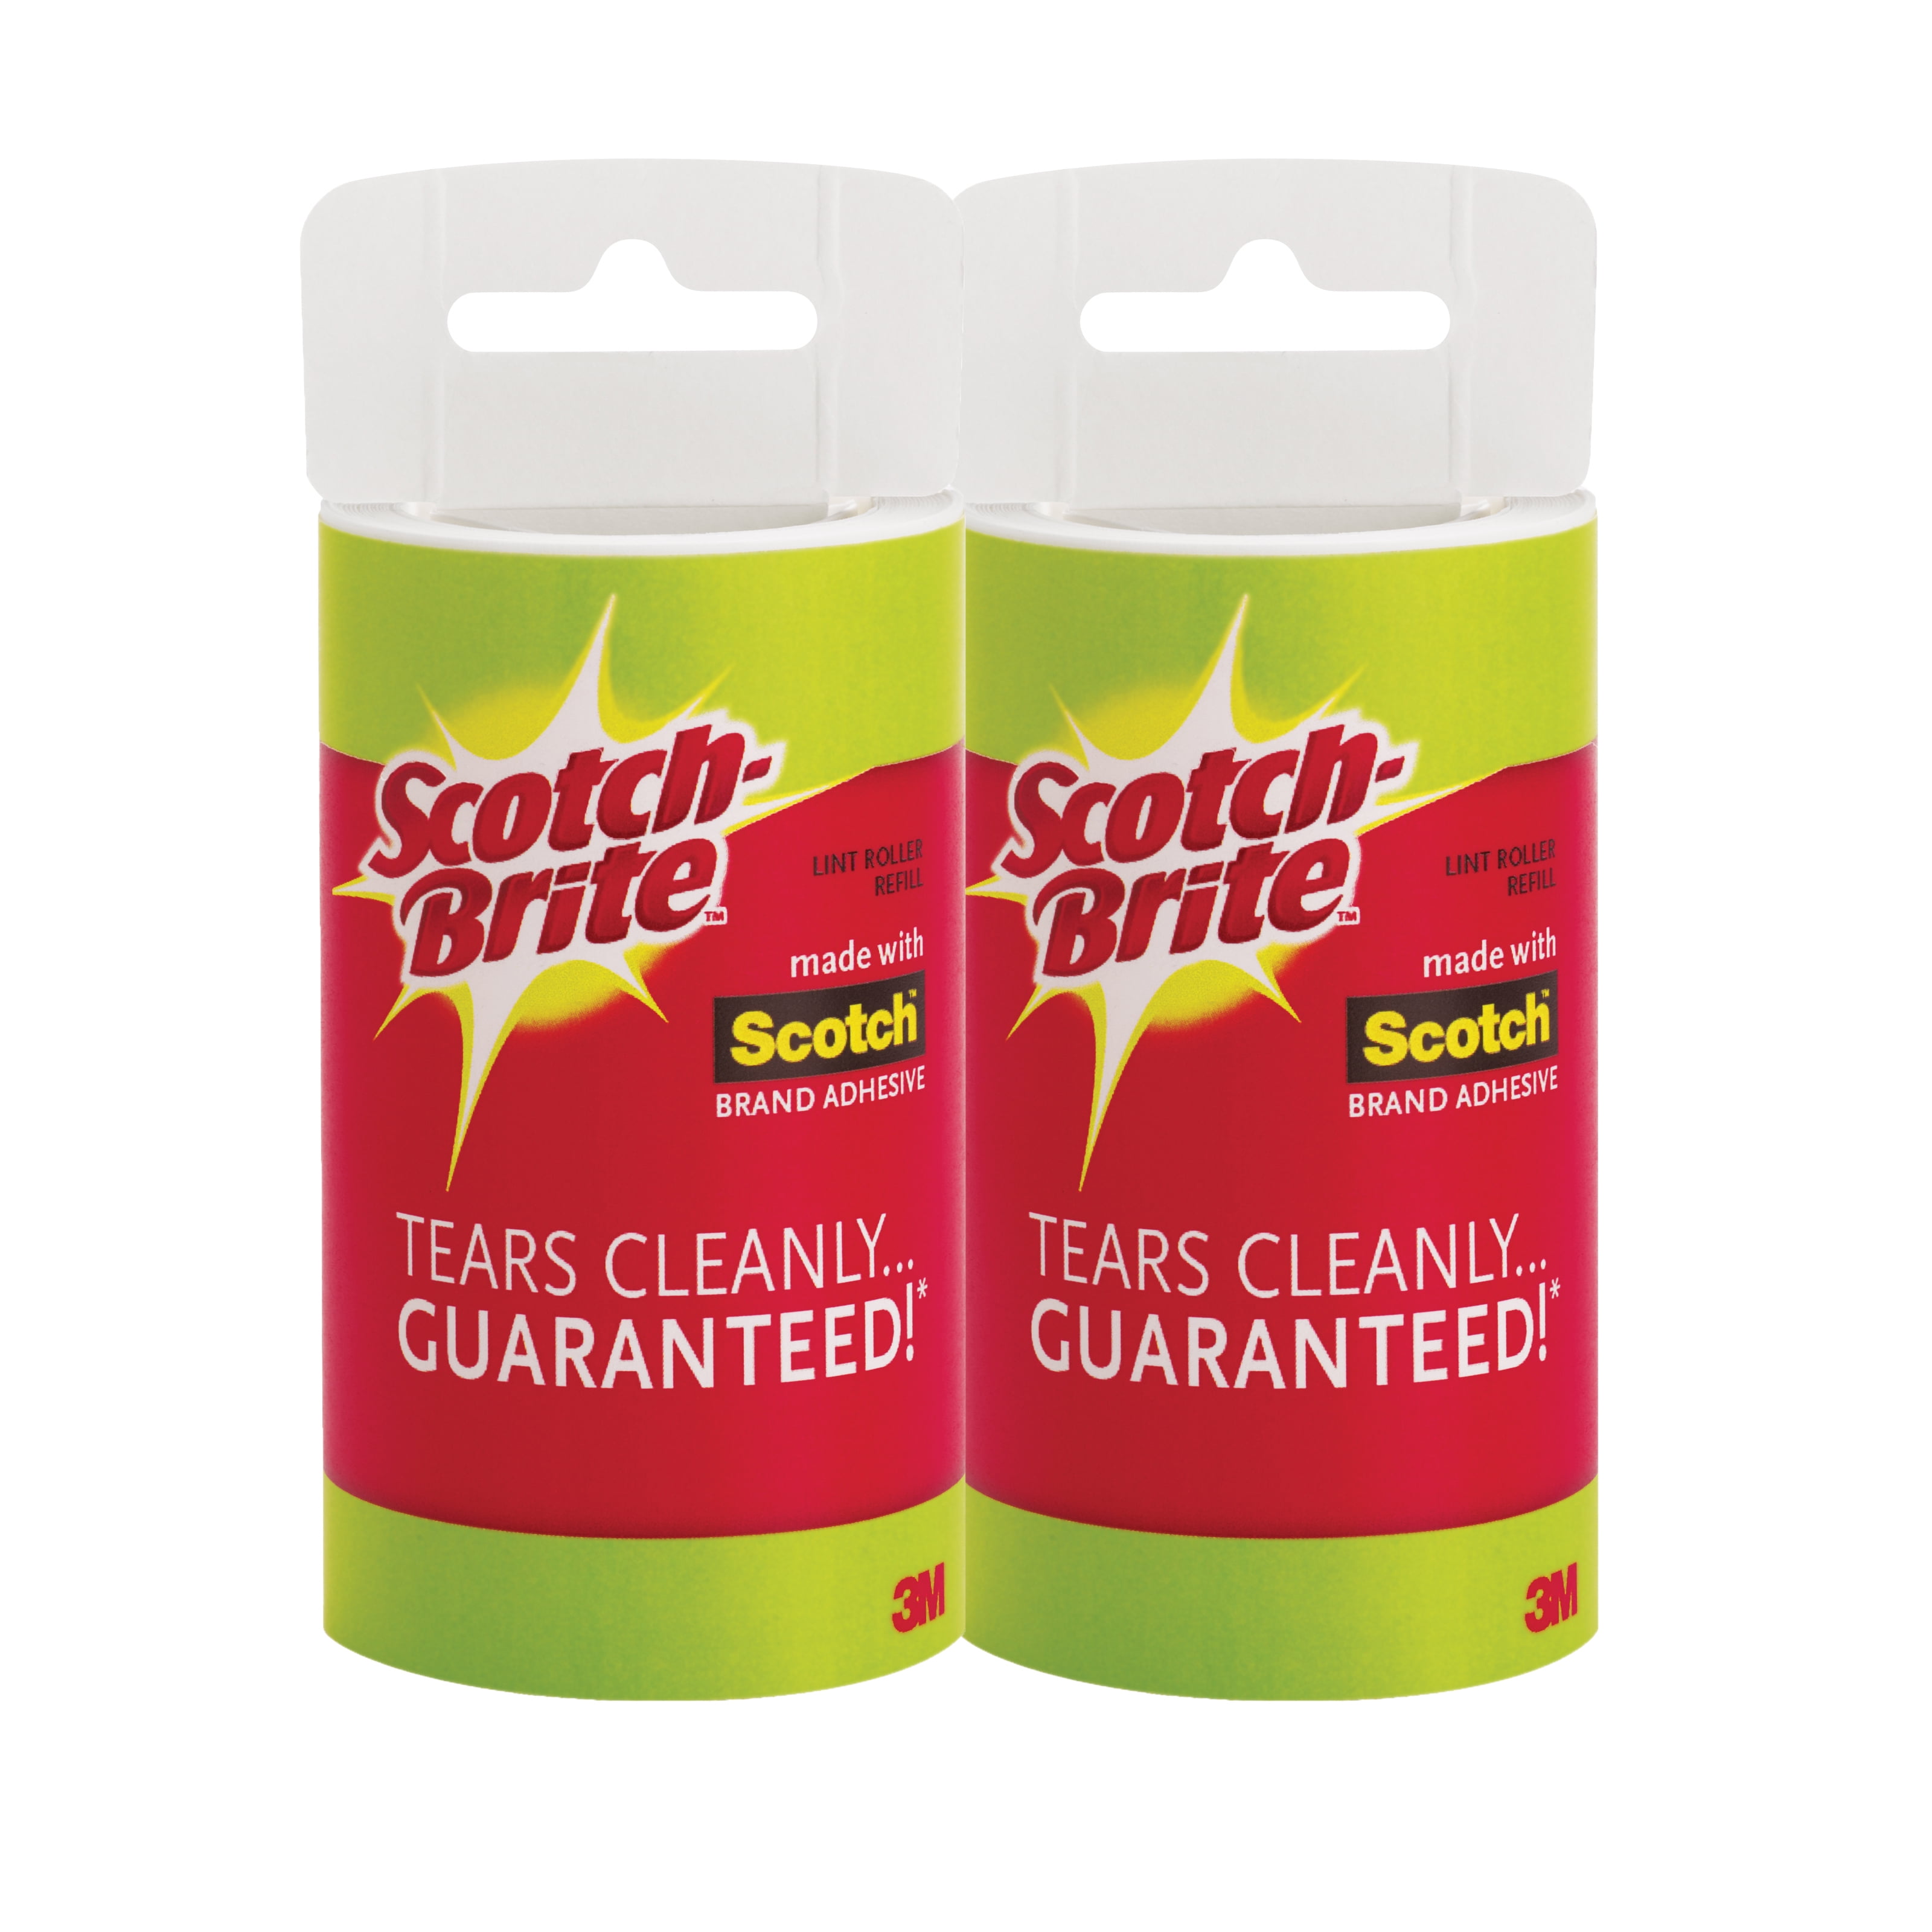 Scotch-Brite Lint Roller Refill Roll 56 ea Pack of 4 